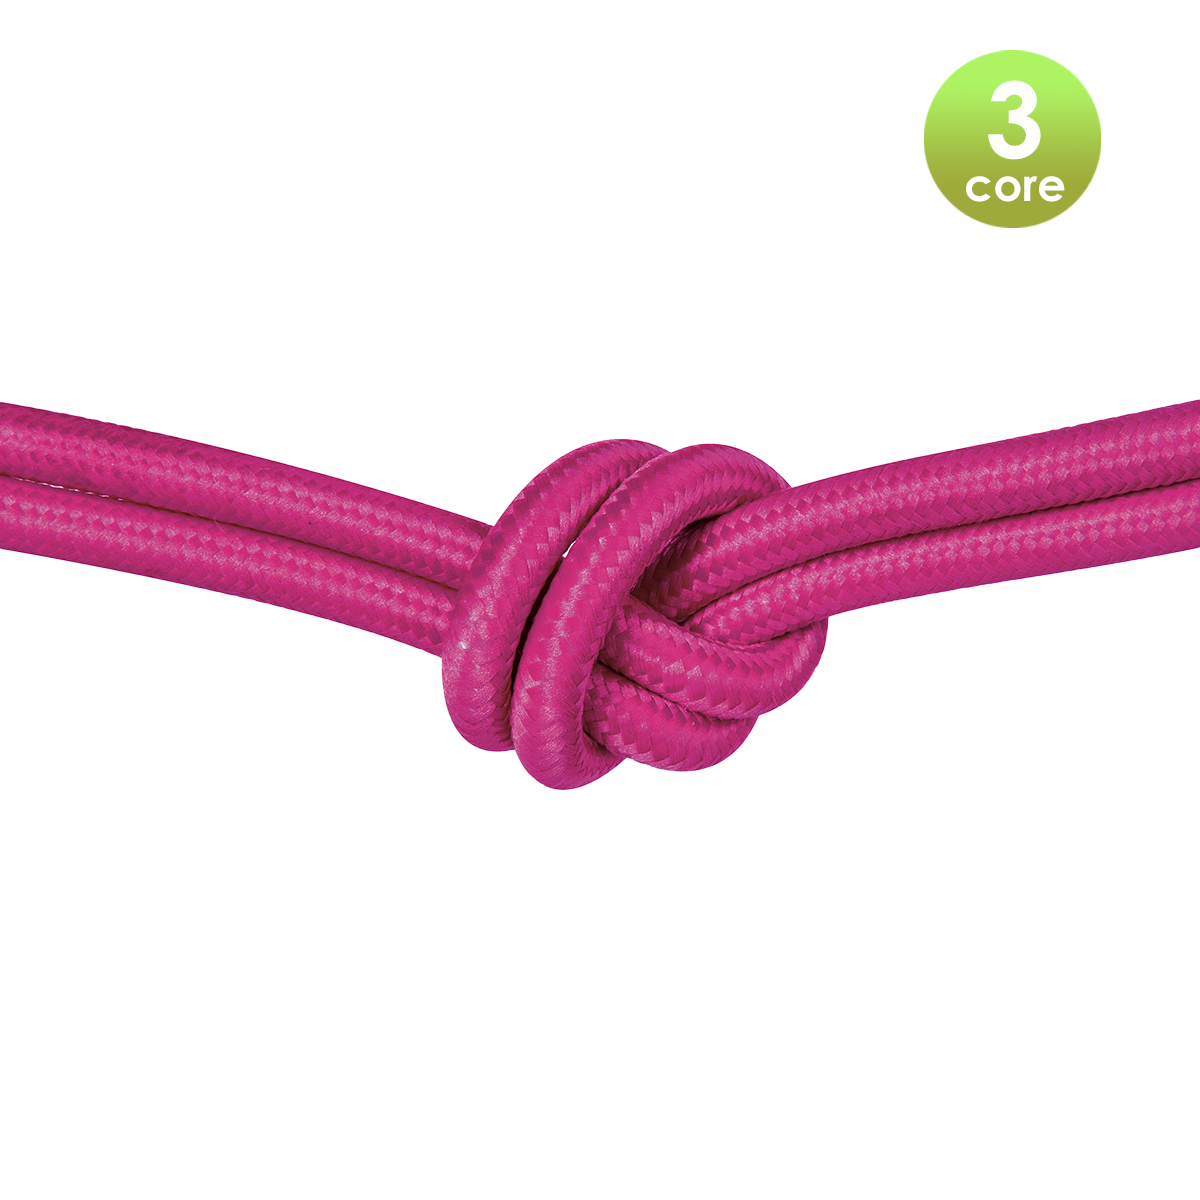 Tangla lighting - TLCB01005RD - 3c - Fabric cable 3 core - in hot pink